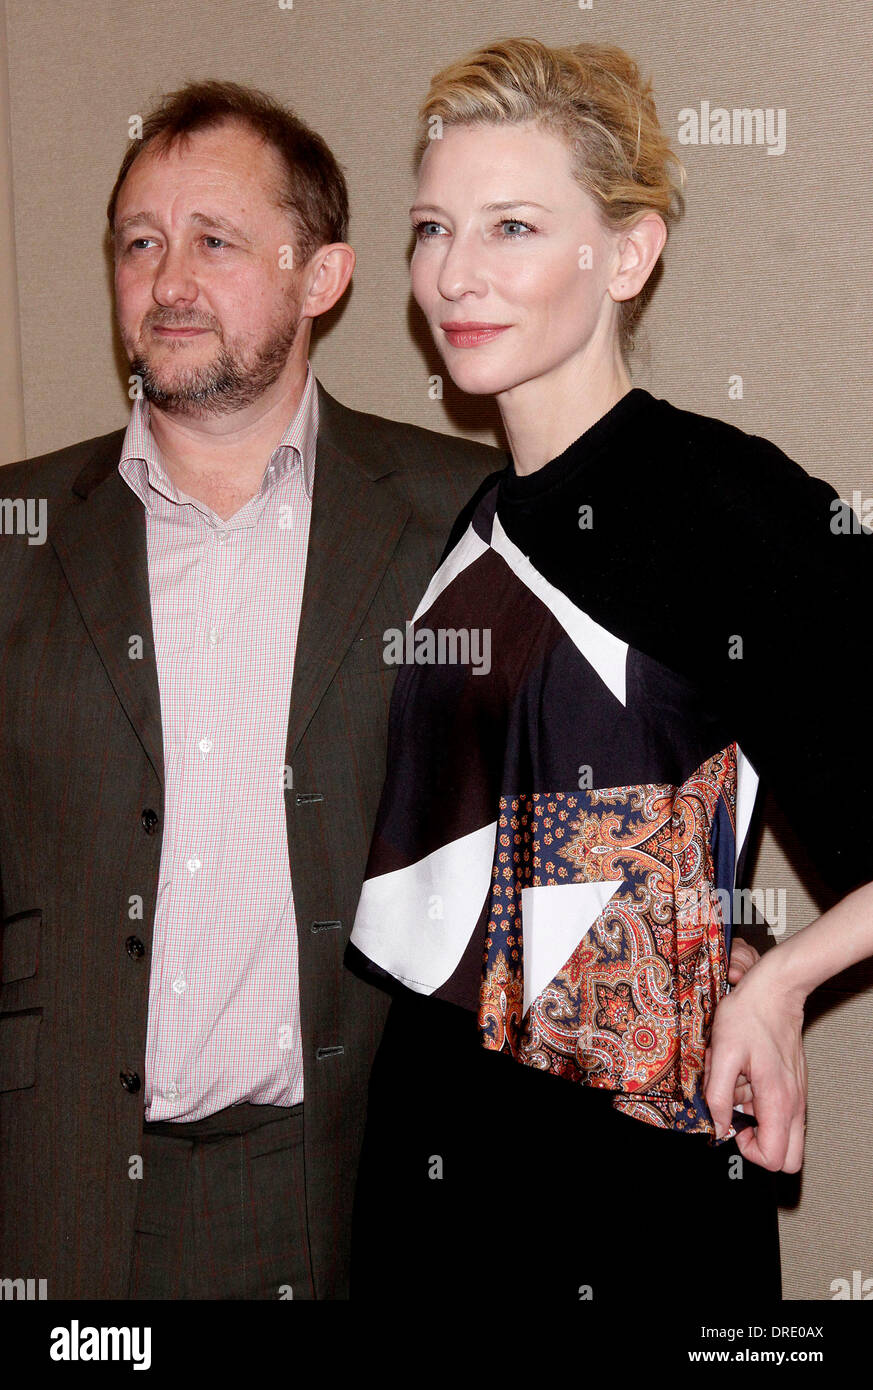 Andrew Upton and Cate Blanchett The opening night party for 'Uncle Vanya' at the New York City Center New York City, USA - 21.07.12 Stock Photo